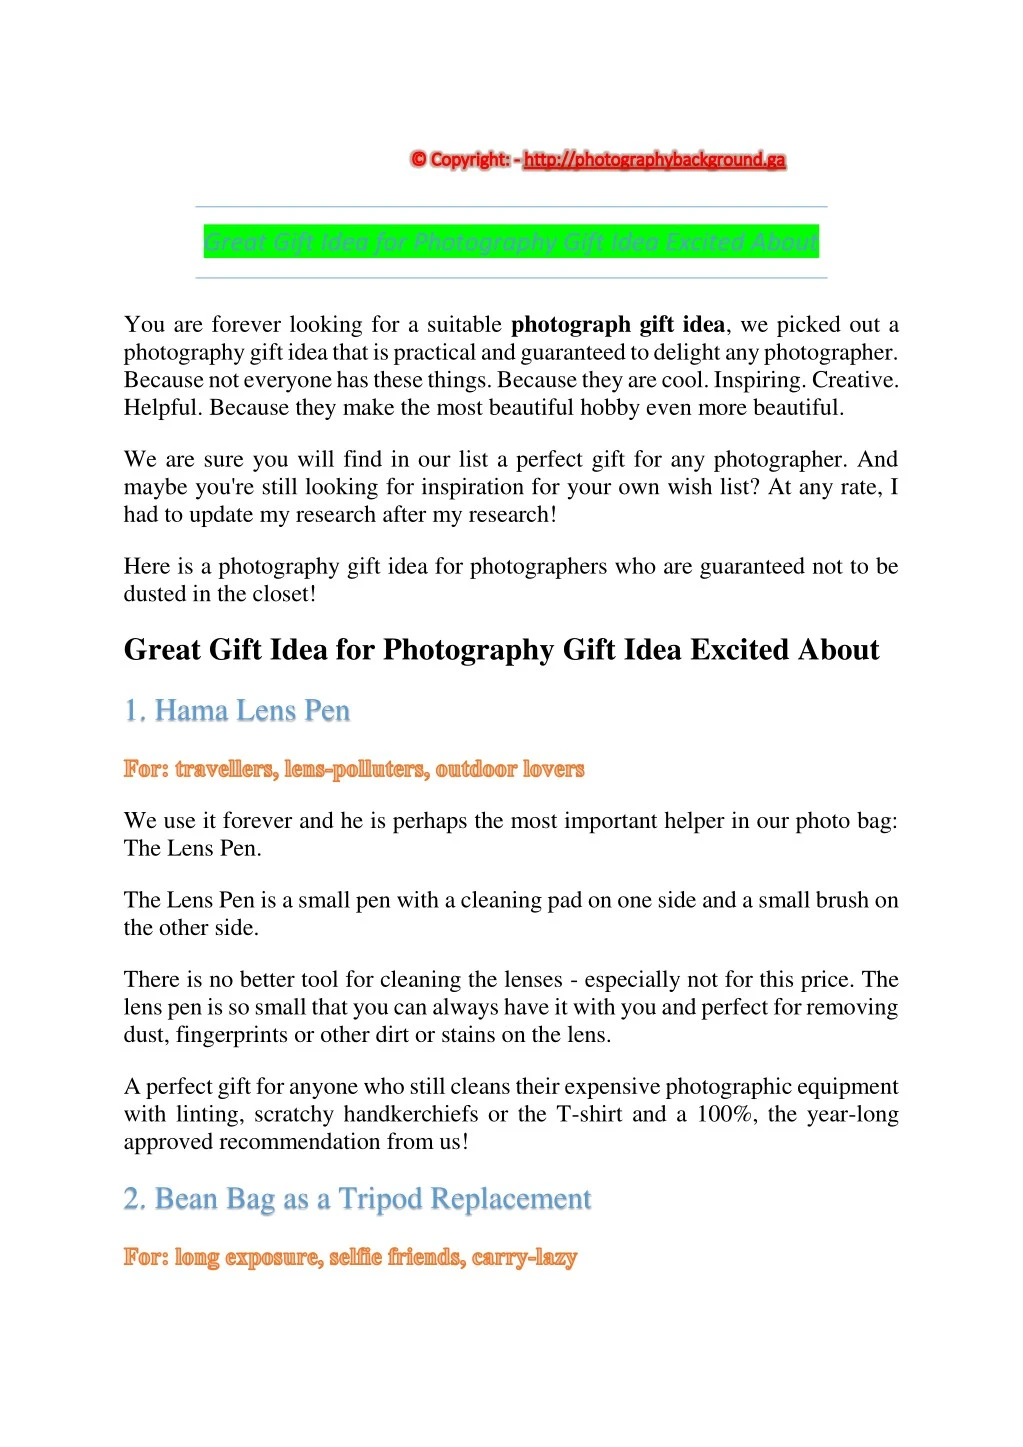 great gift idea for photography gift idea excited